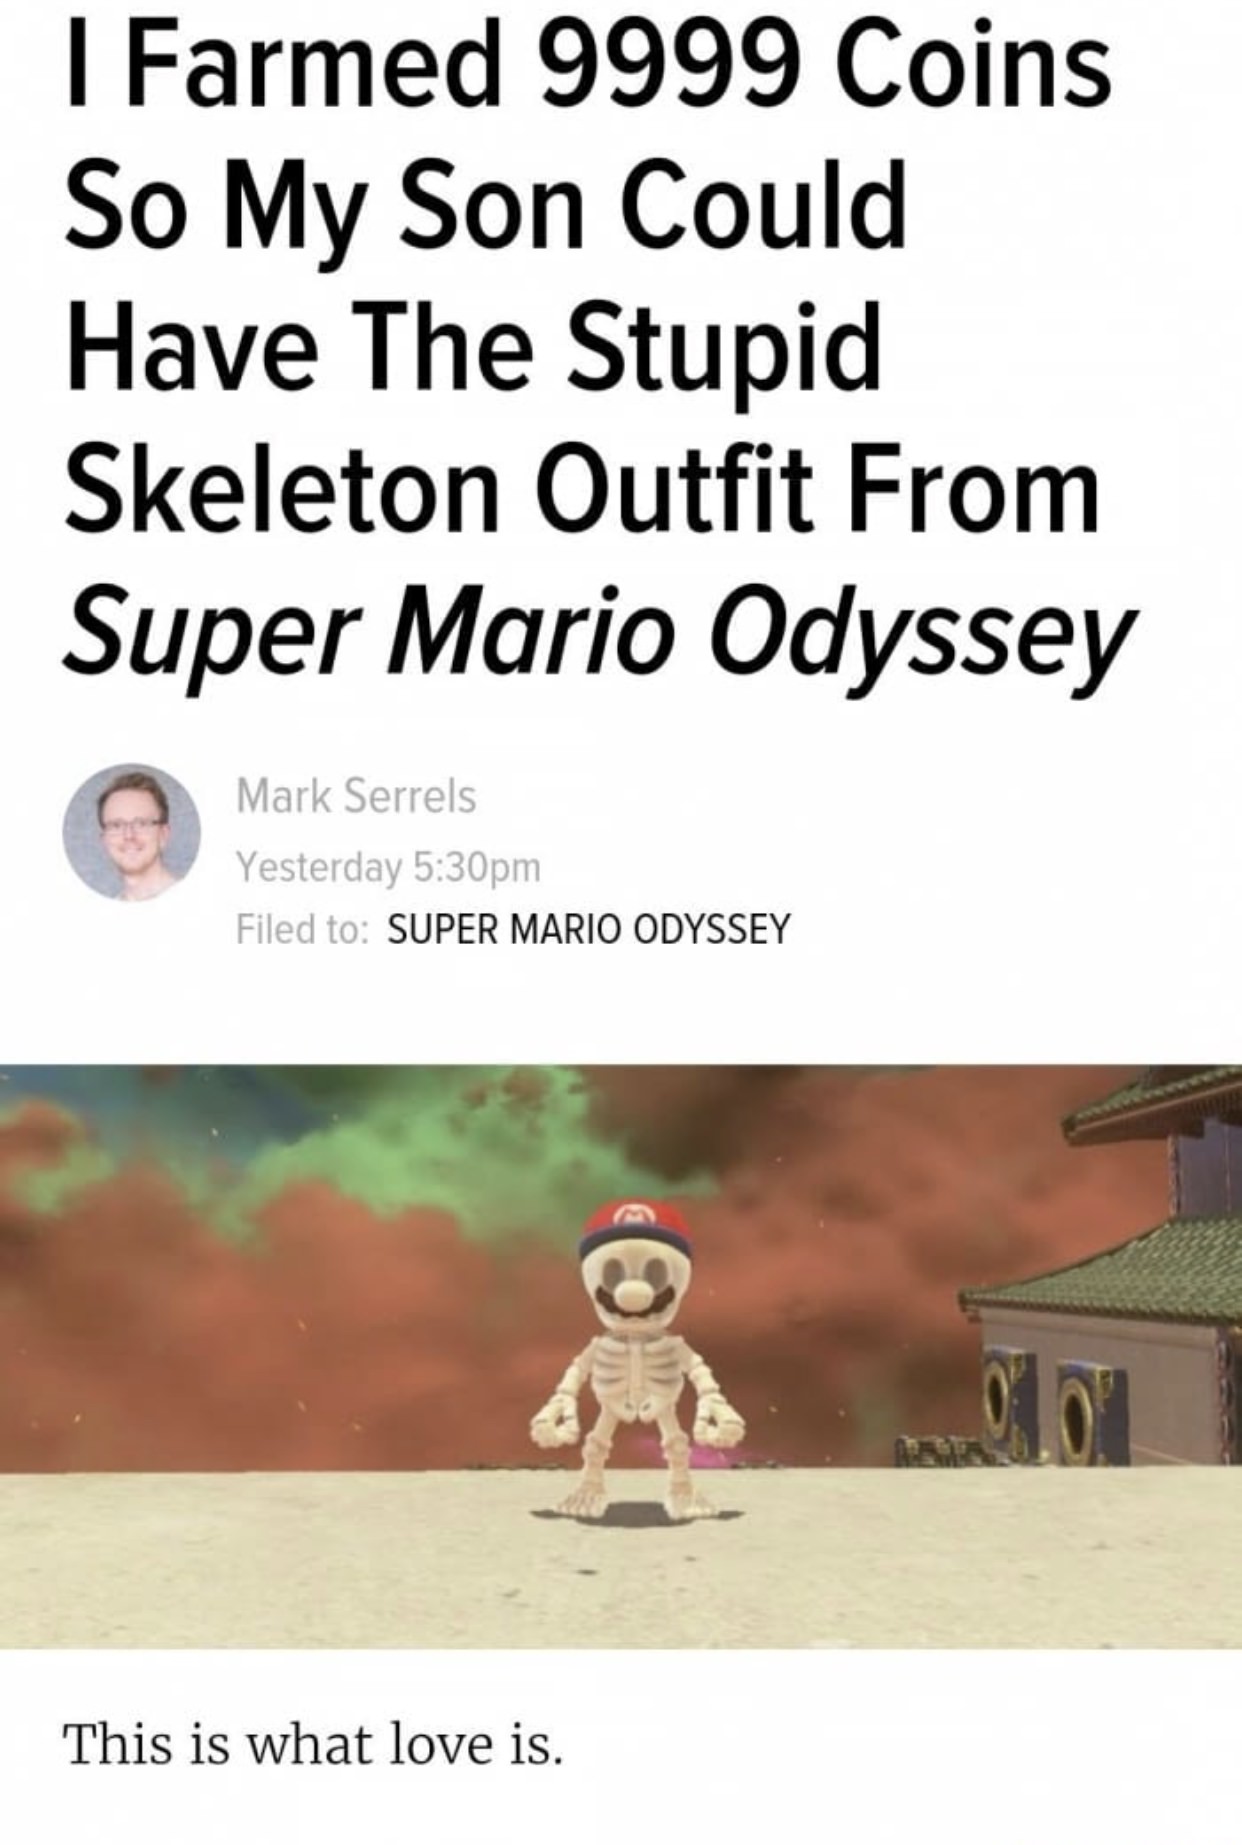 cartoon - I Farmed 9999 Coins So My Son Could Have The Stupid Skeleton Outfit From Super Mario Odyssey Mark Serrels Yesterday pm Filed to Super Mario Odyssey This is what love is.